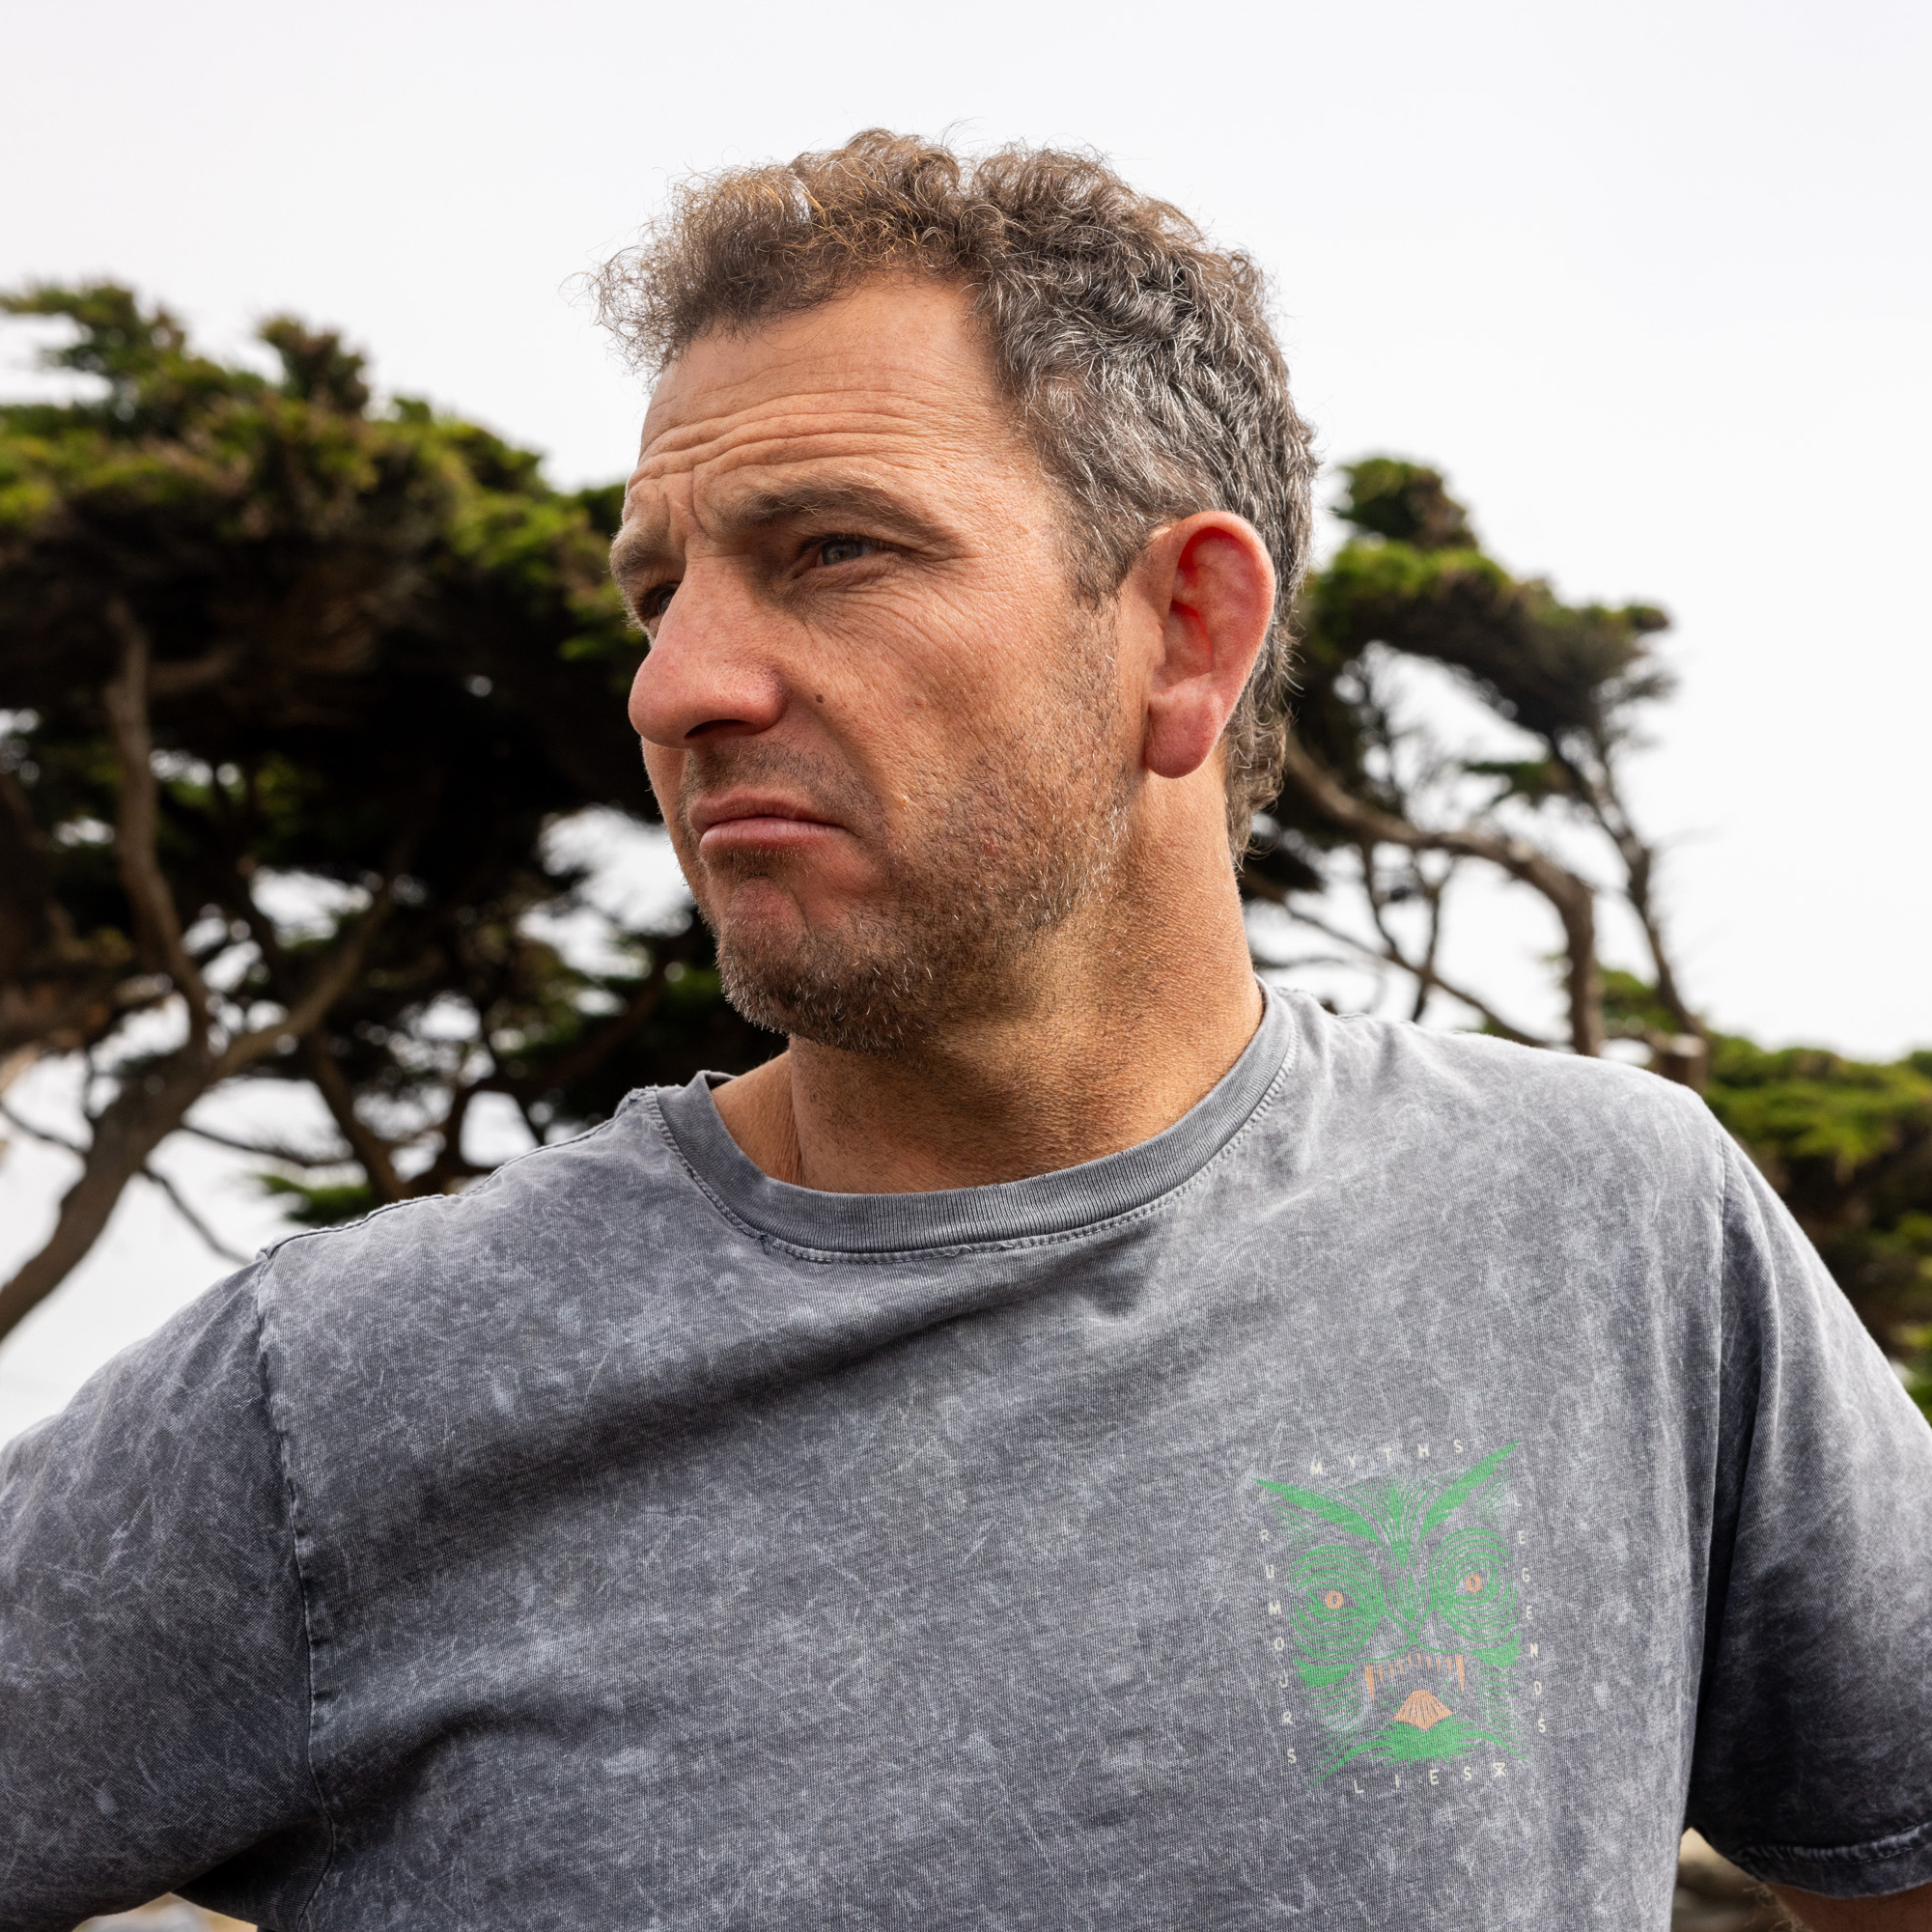 A man with graying curly hair and stubble wears a washed-out gray T-shirt featuring a small green design. He stands outdoors in front of tree branches, looking to the side.